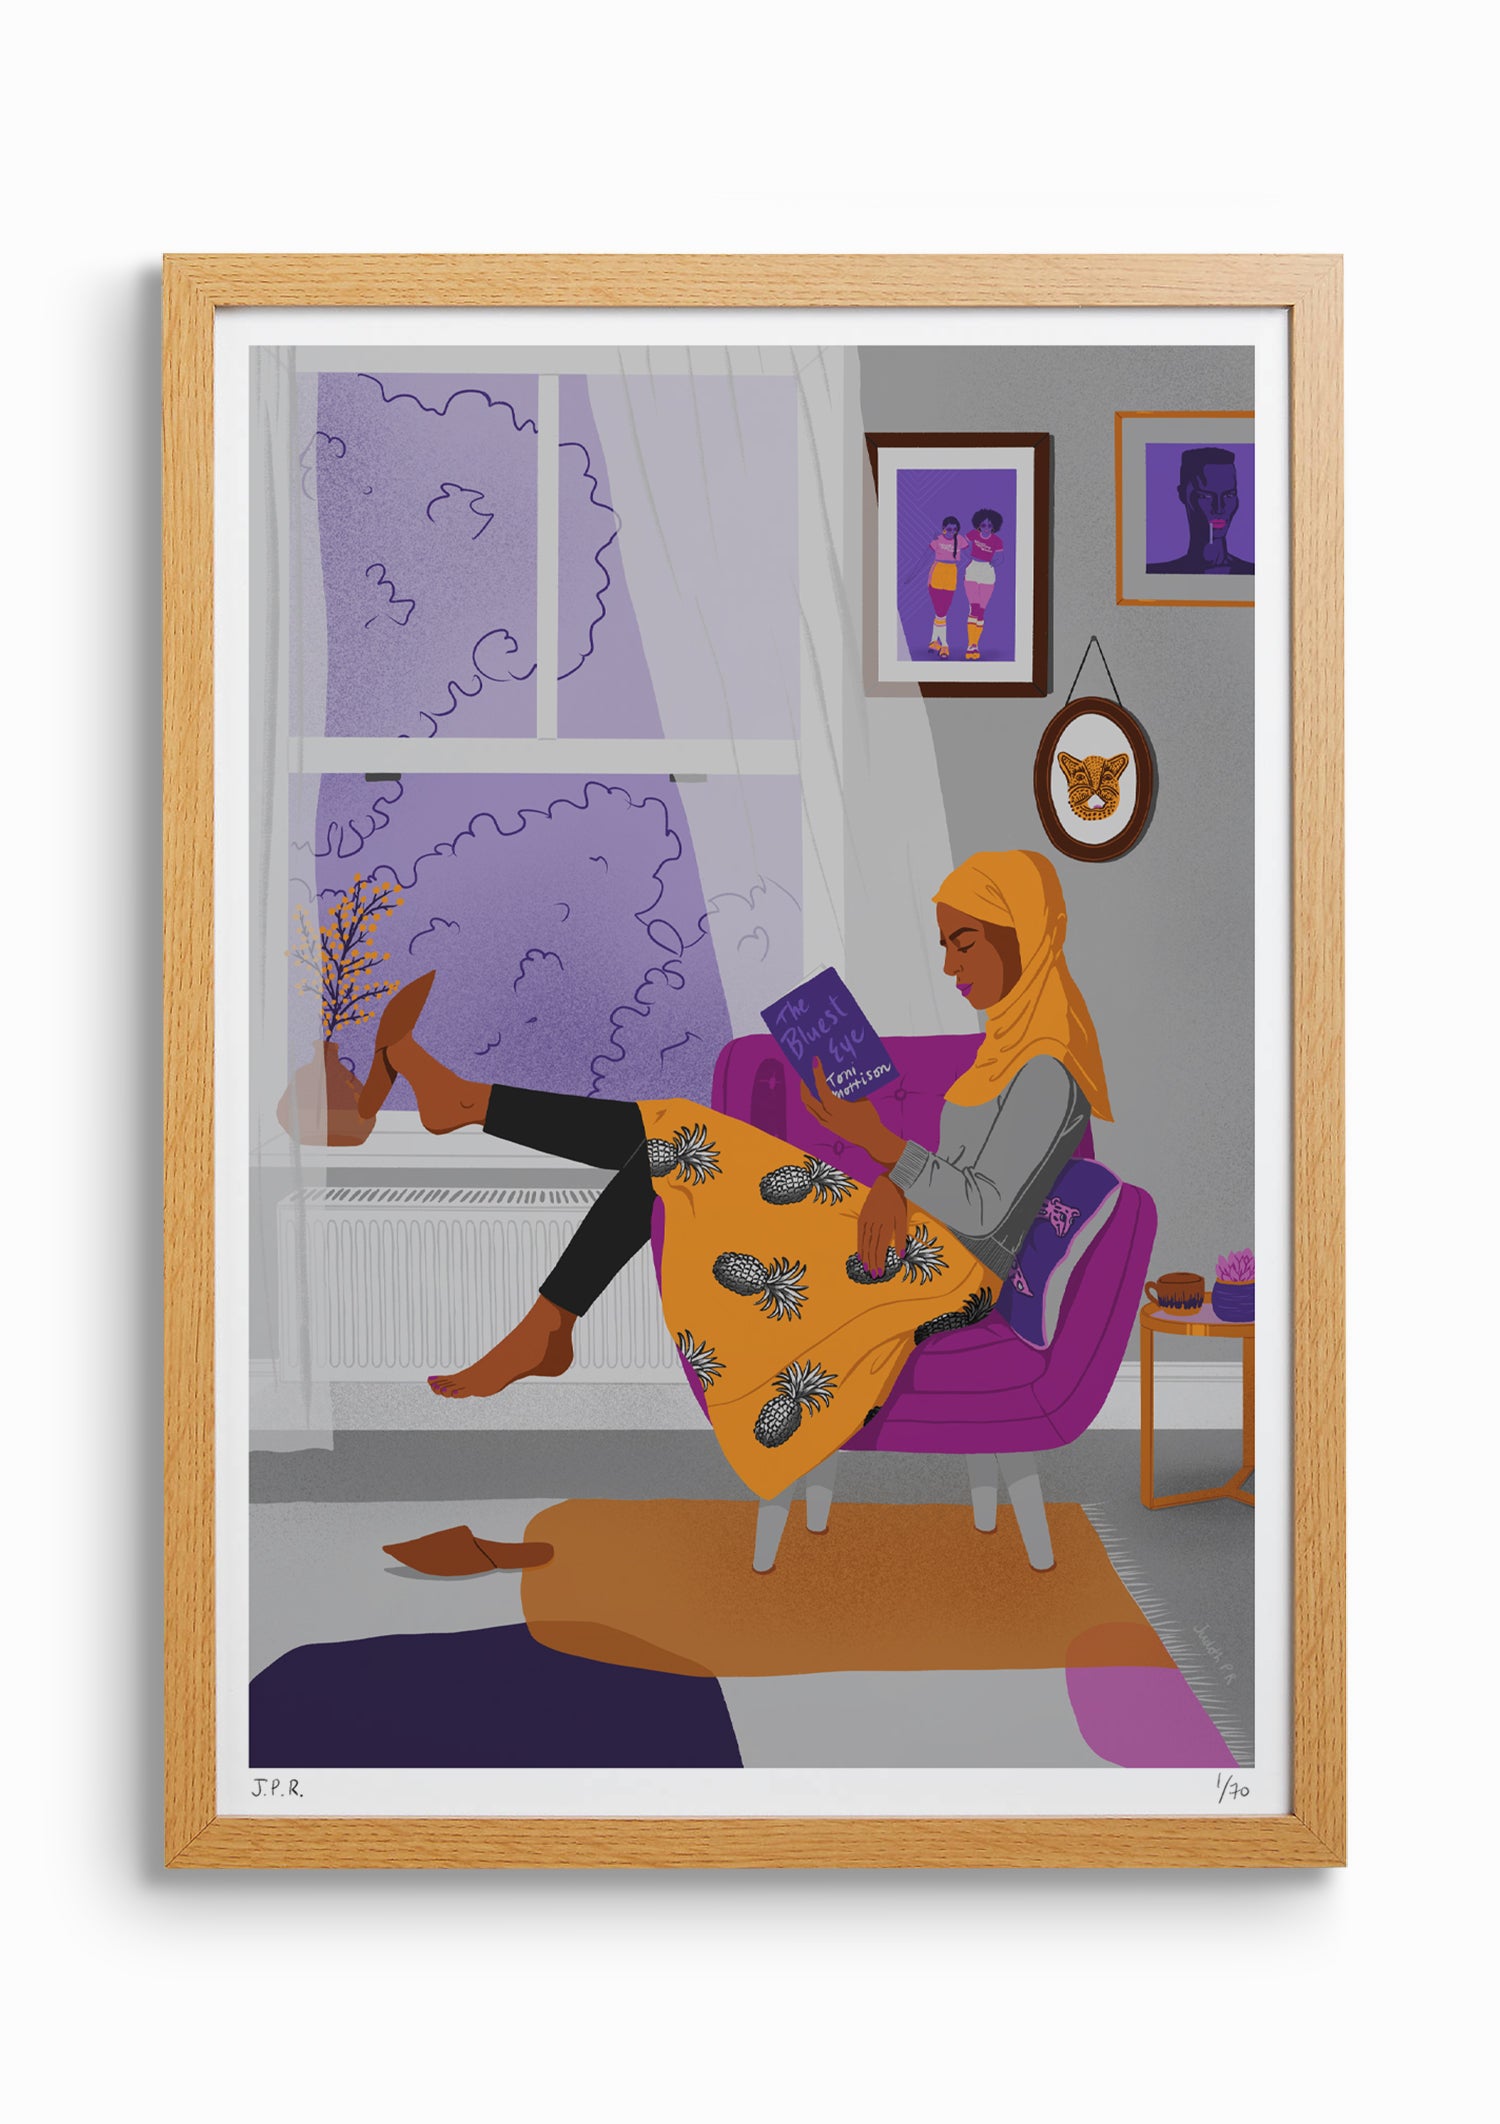 Framed illustration of a Muslim woman reading the book The Bluest Eye by Toni Morrison. She is sat by the window on an armchair and the light curtains are being moved by the breeze.